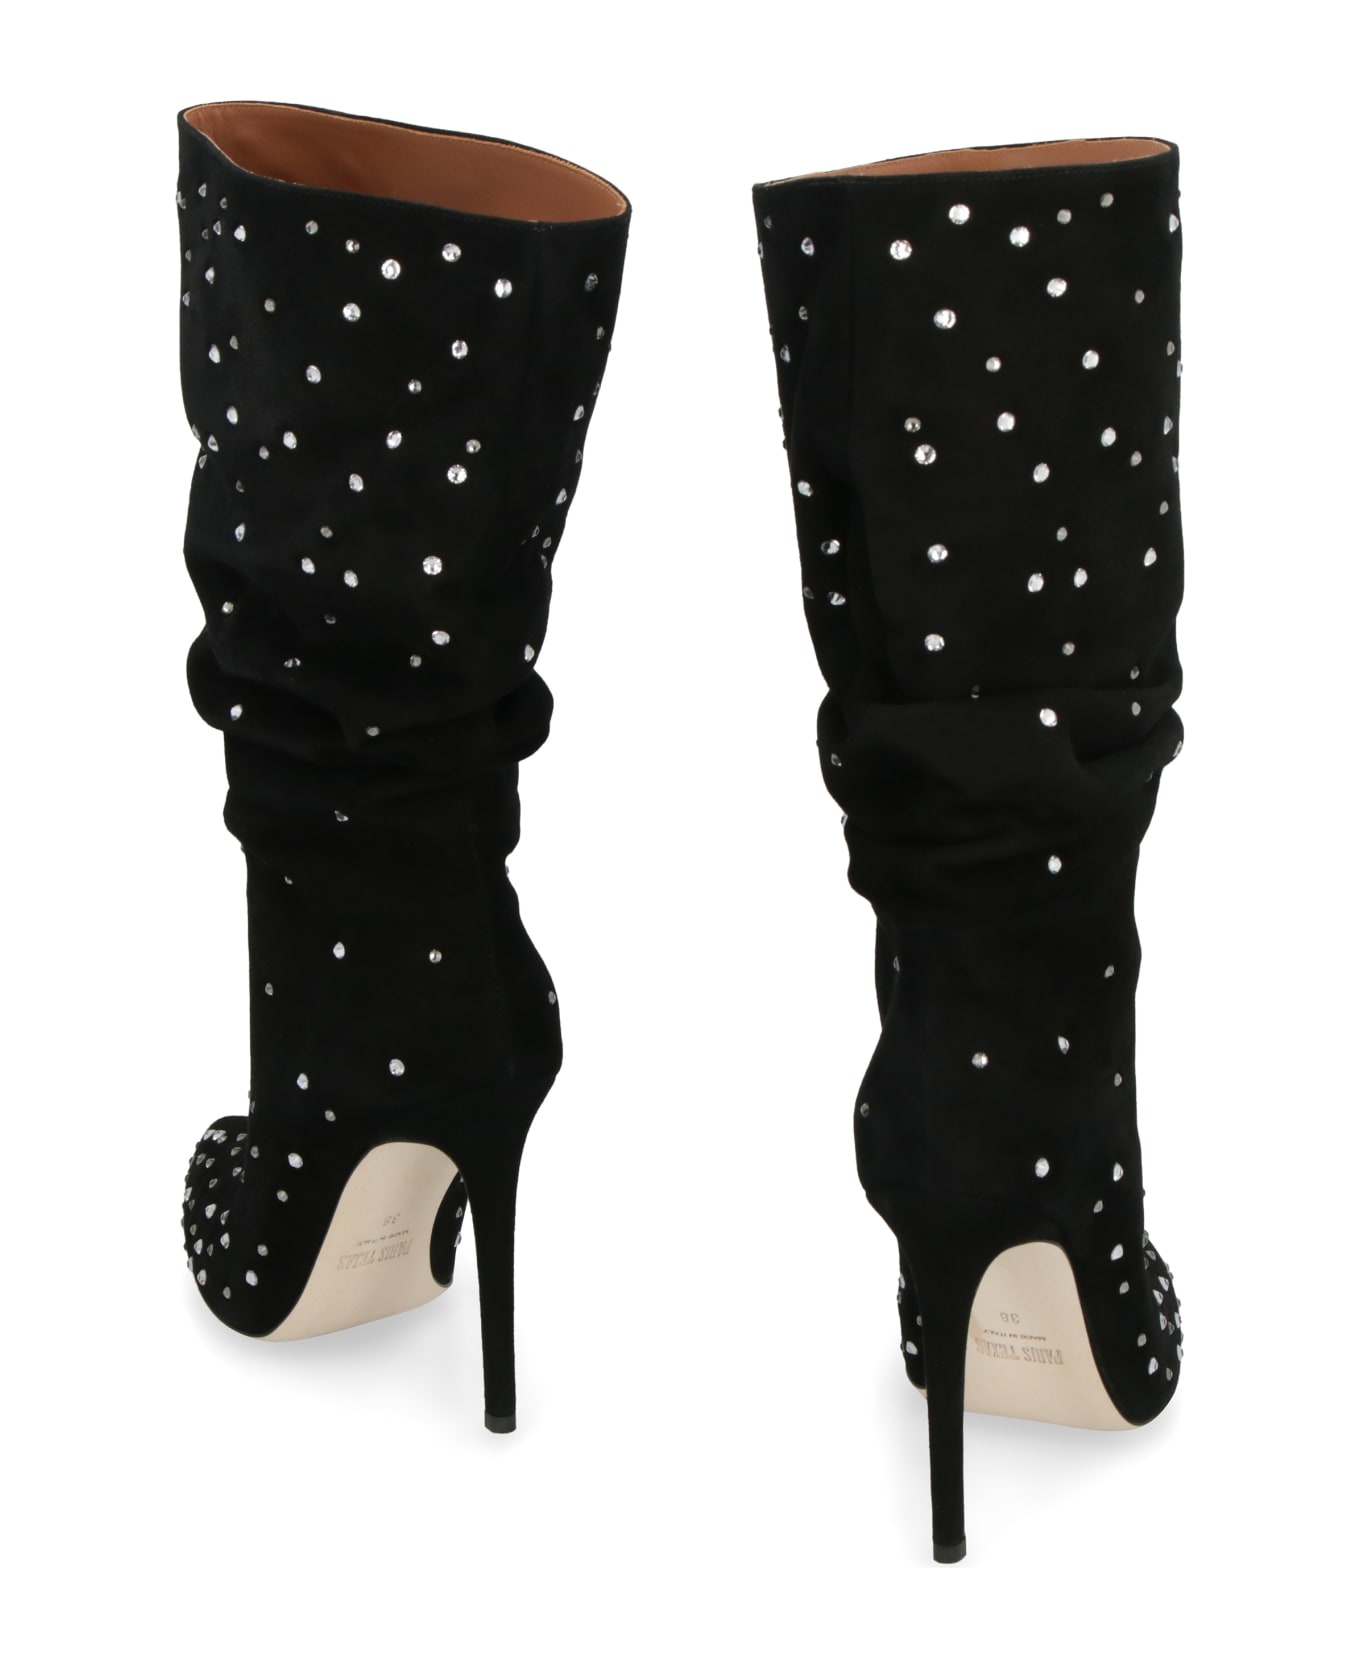 Paris Texas Holly Suede Knee High Boots - black